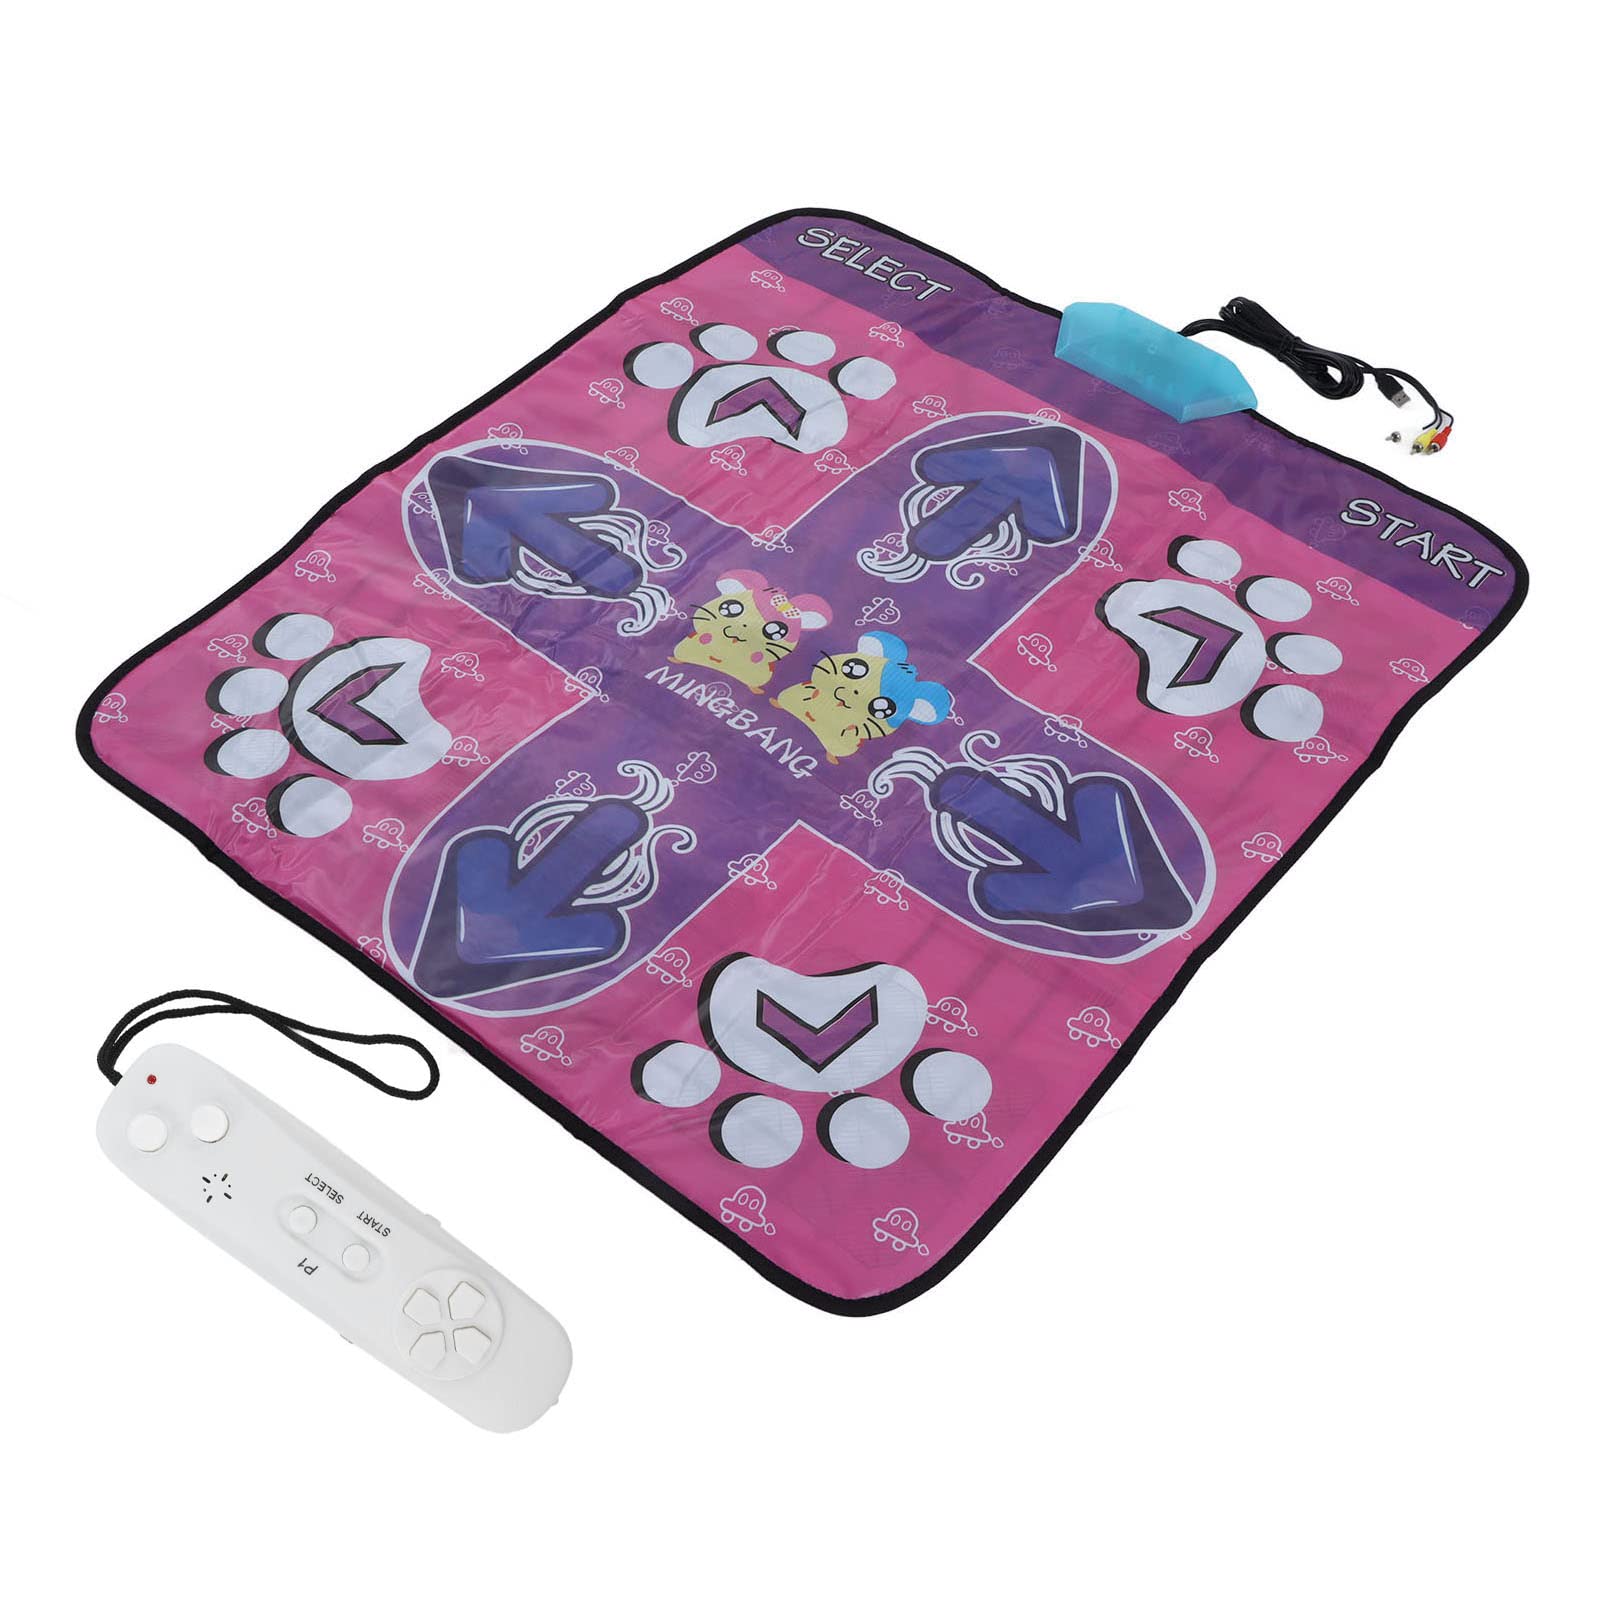 Pilipane Dance Mat,for 3 4 5 6 7 8 9 10 Year Old Girls Birthday Gifts,Dance Pad with LED Lights,Built in Music,HD AV Interface,Dance Game Toy Gift for Kids Girls Boys Birthday